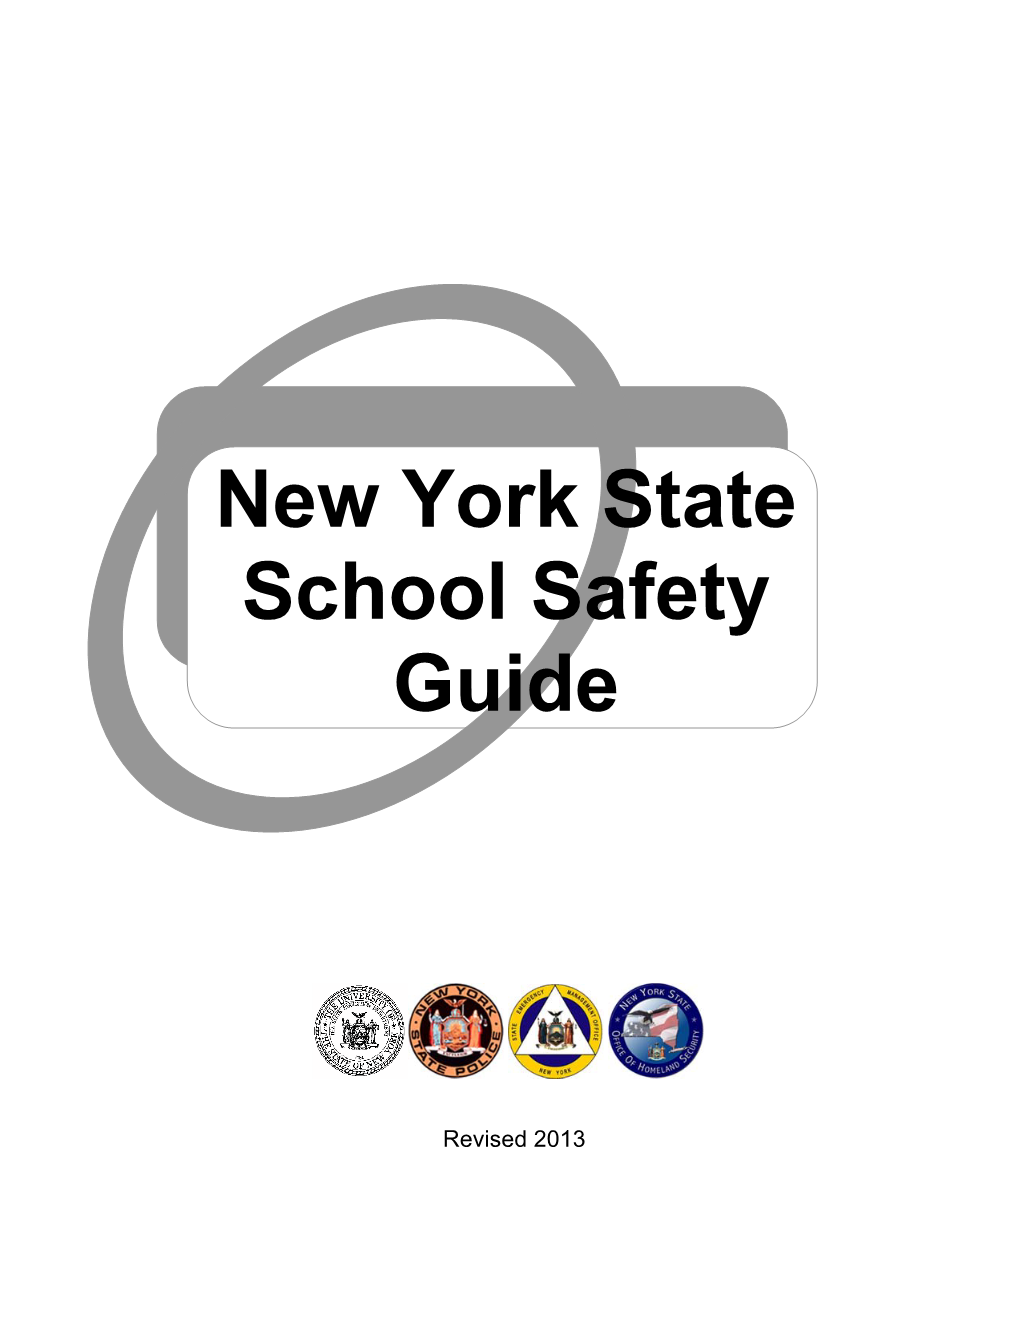 New York State School Safety Guide